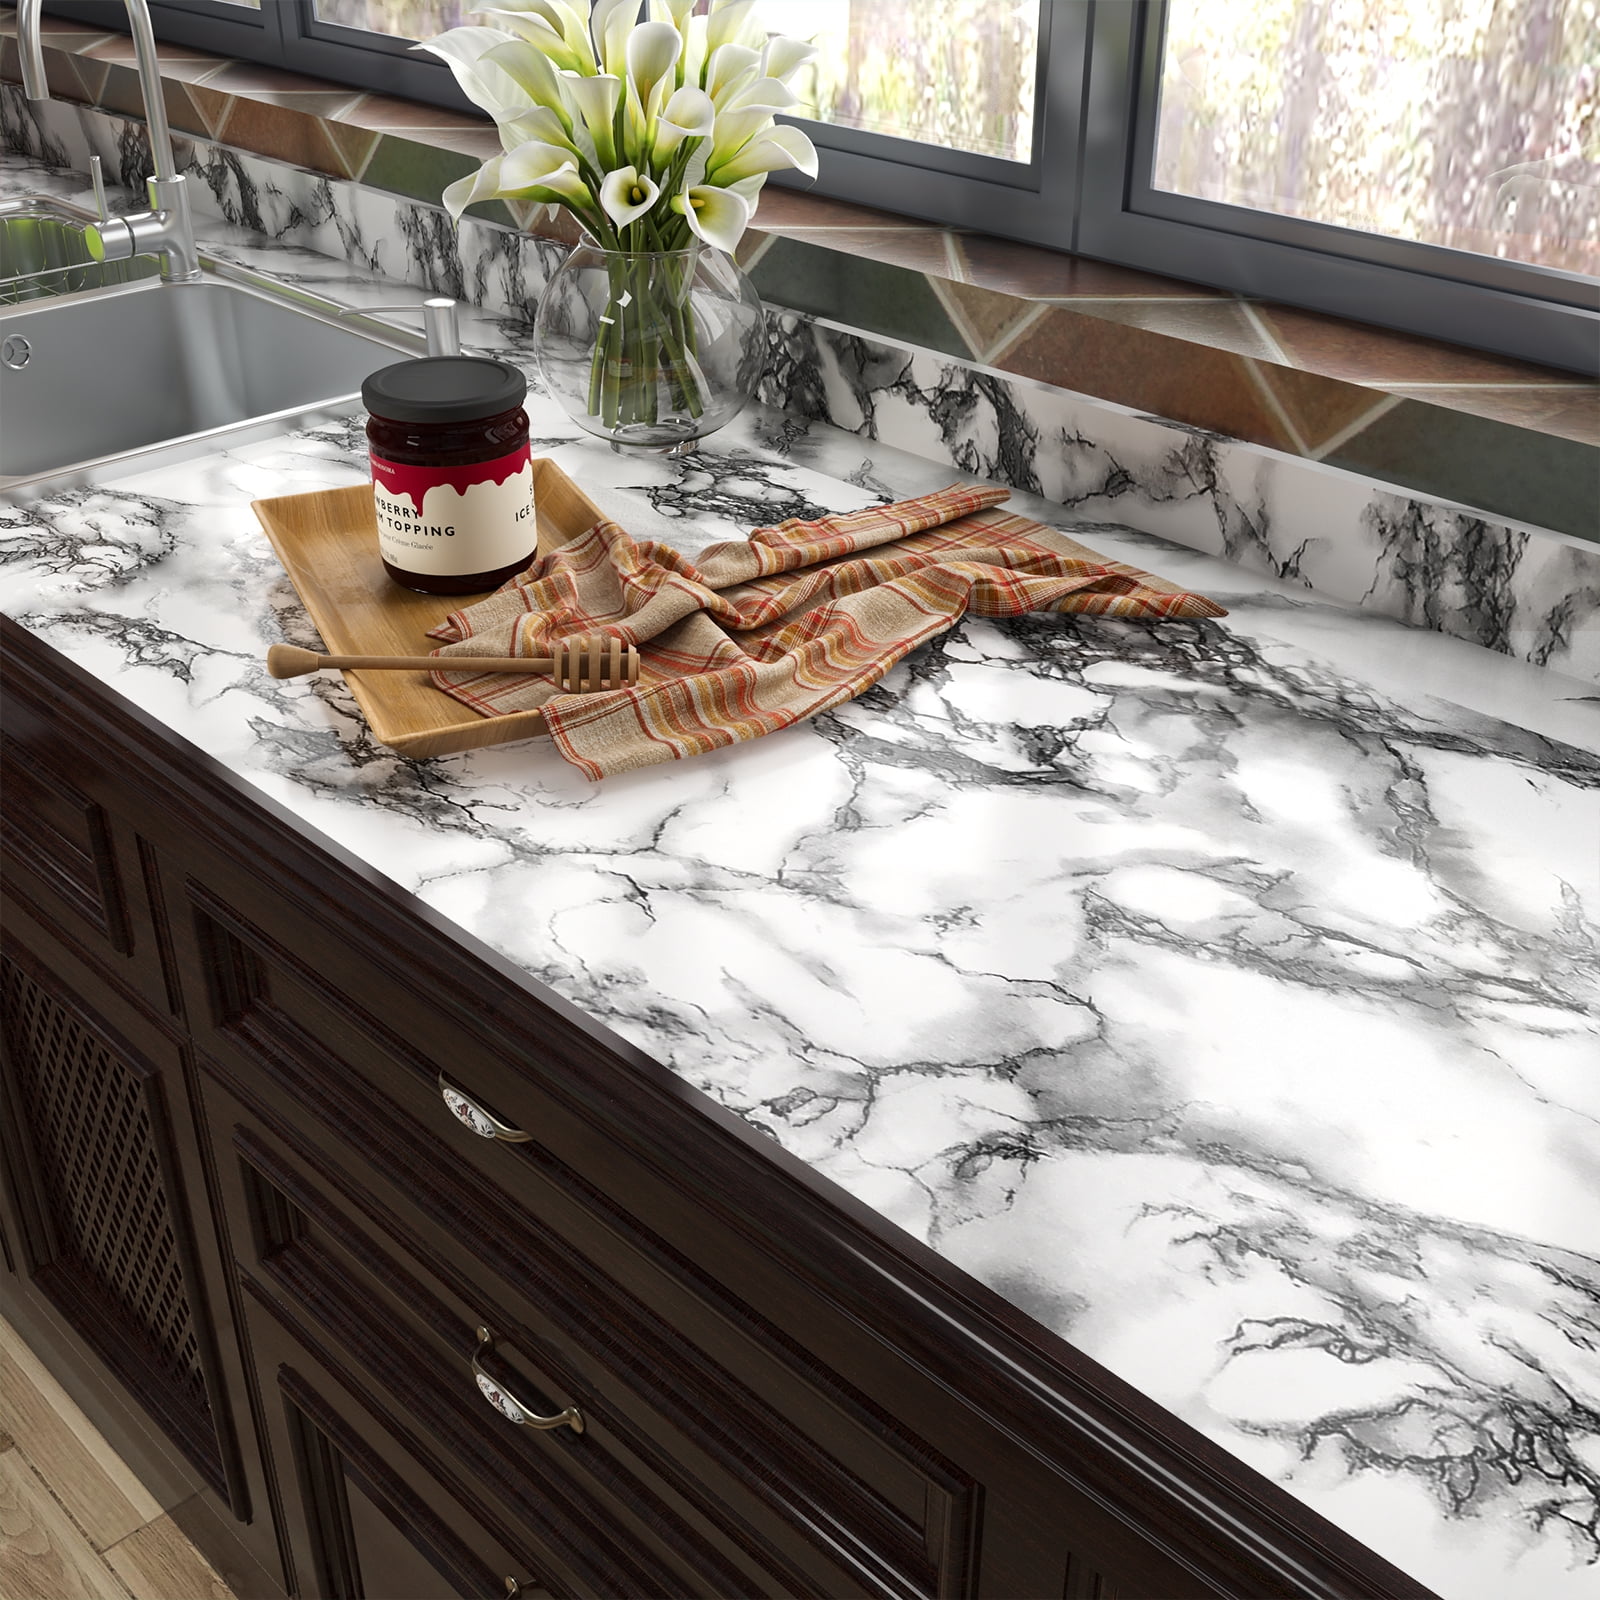 LaCheery Grey Marble Countertop Contact Paper Light Peel Stick Wallpaper Self Adhesive Removable Kitchen Cabinets Bathroom Sink Backsplash Counter 16 474826eb F344 4640 99c5 C461f5554498.fc956a1a4a24608a4f7cf28070ad9abc 